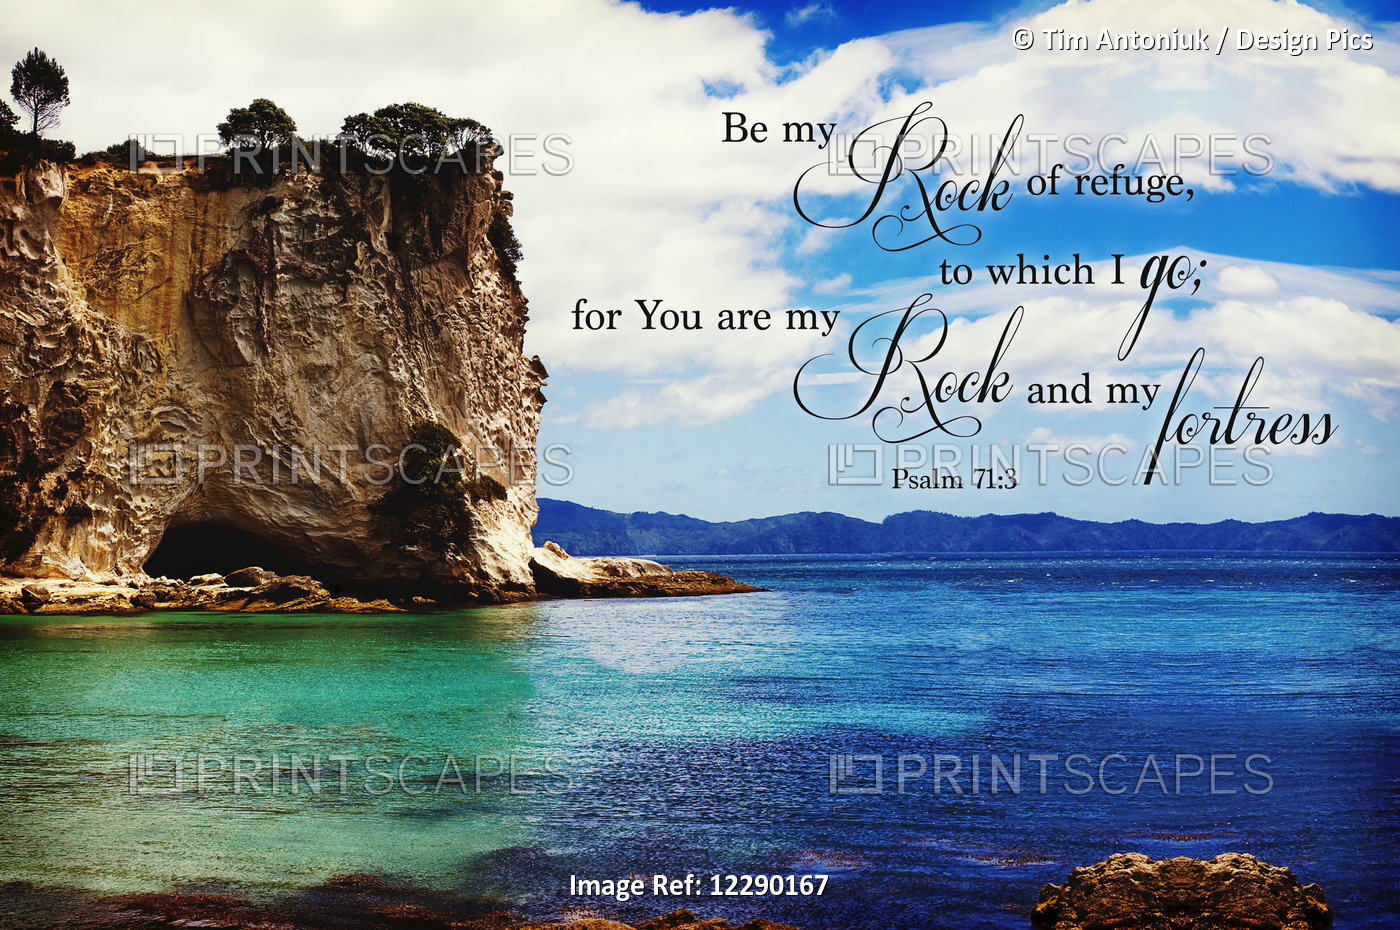 Image Of A Cliff On The Coast With Blue And Turquoise Water And Scripture From ...